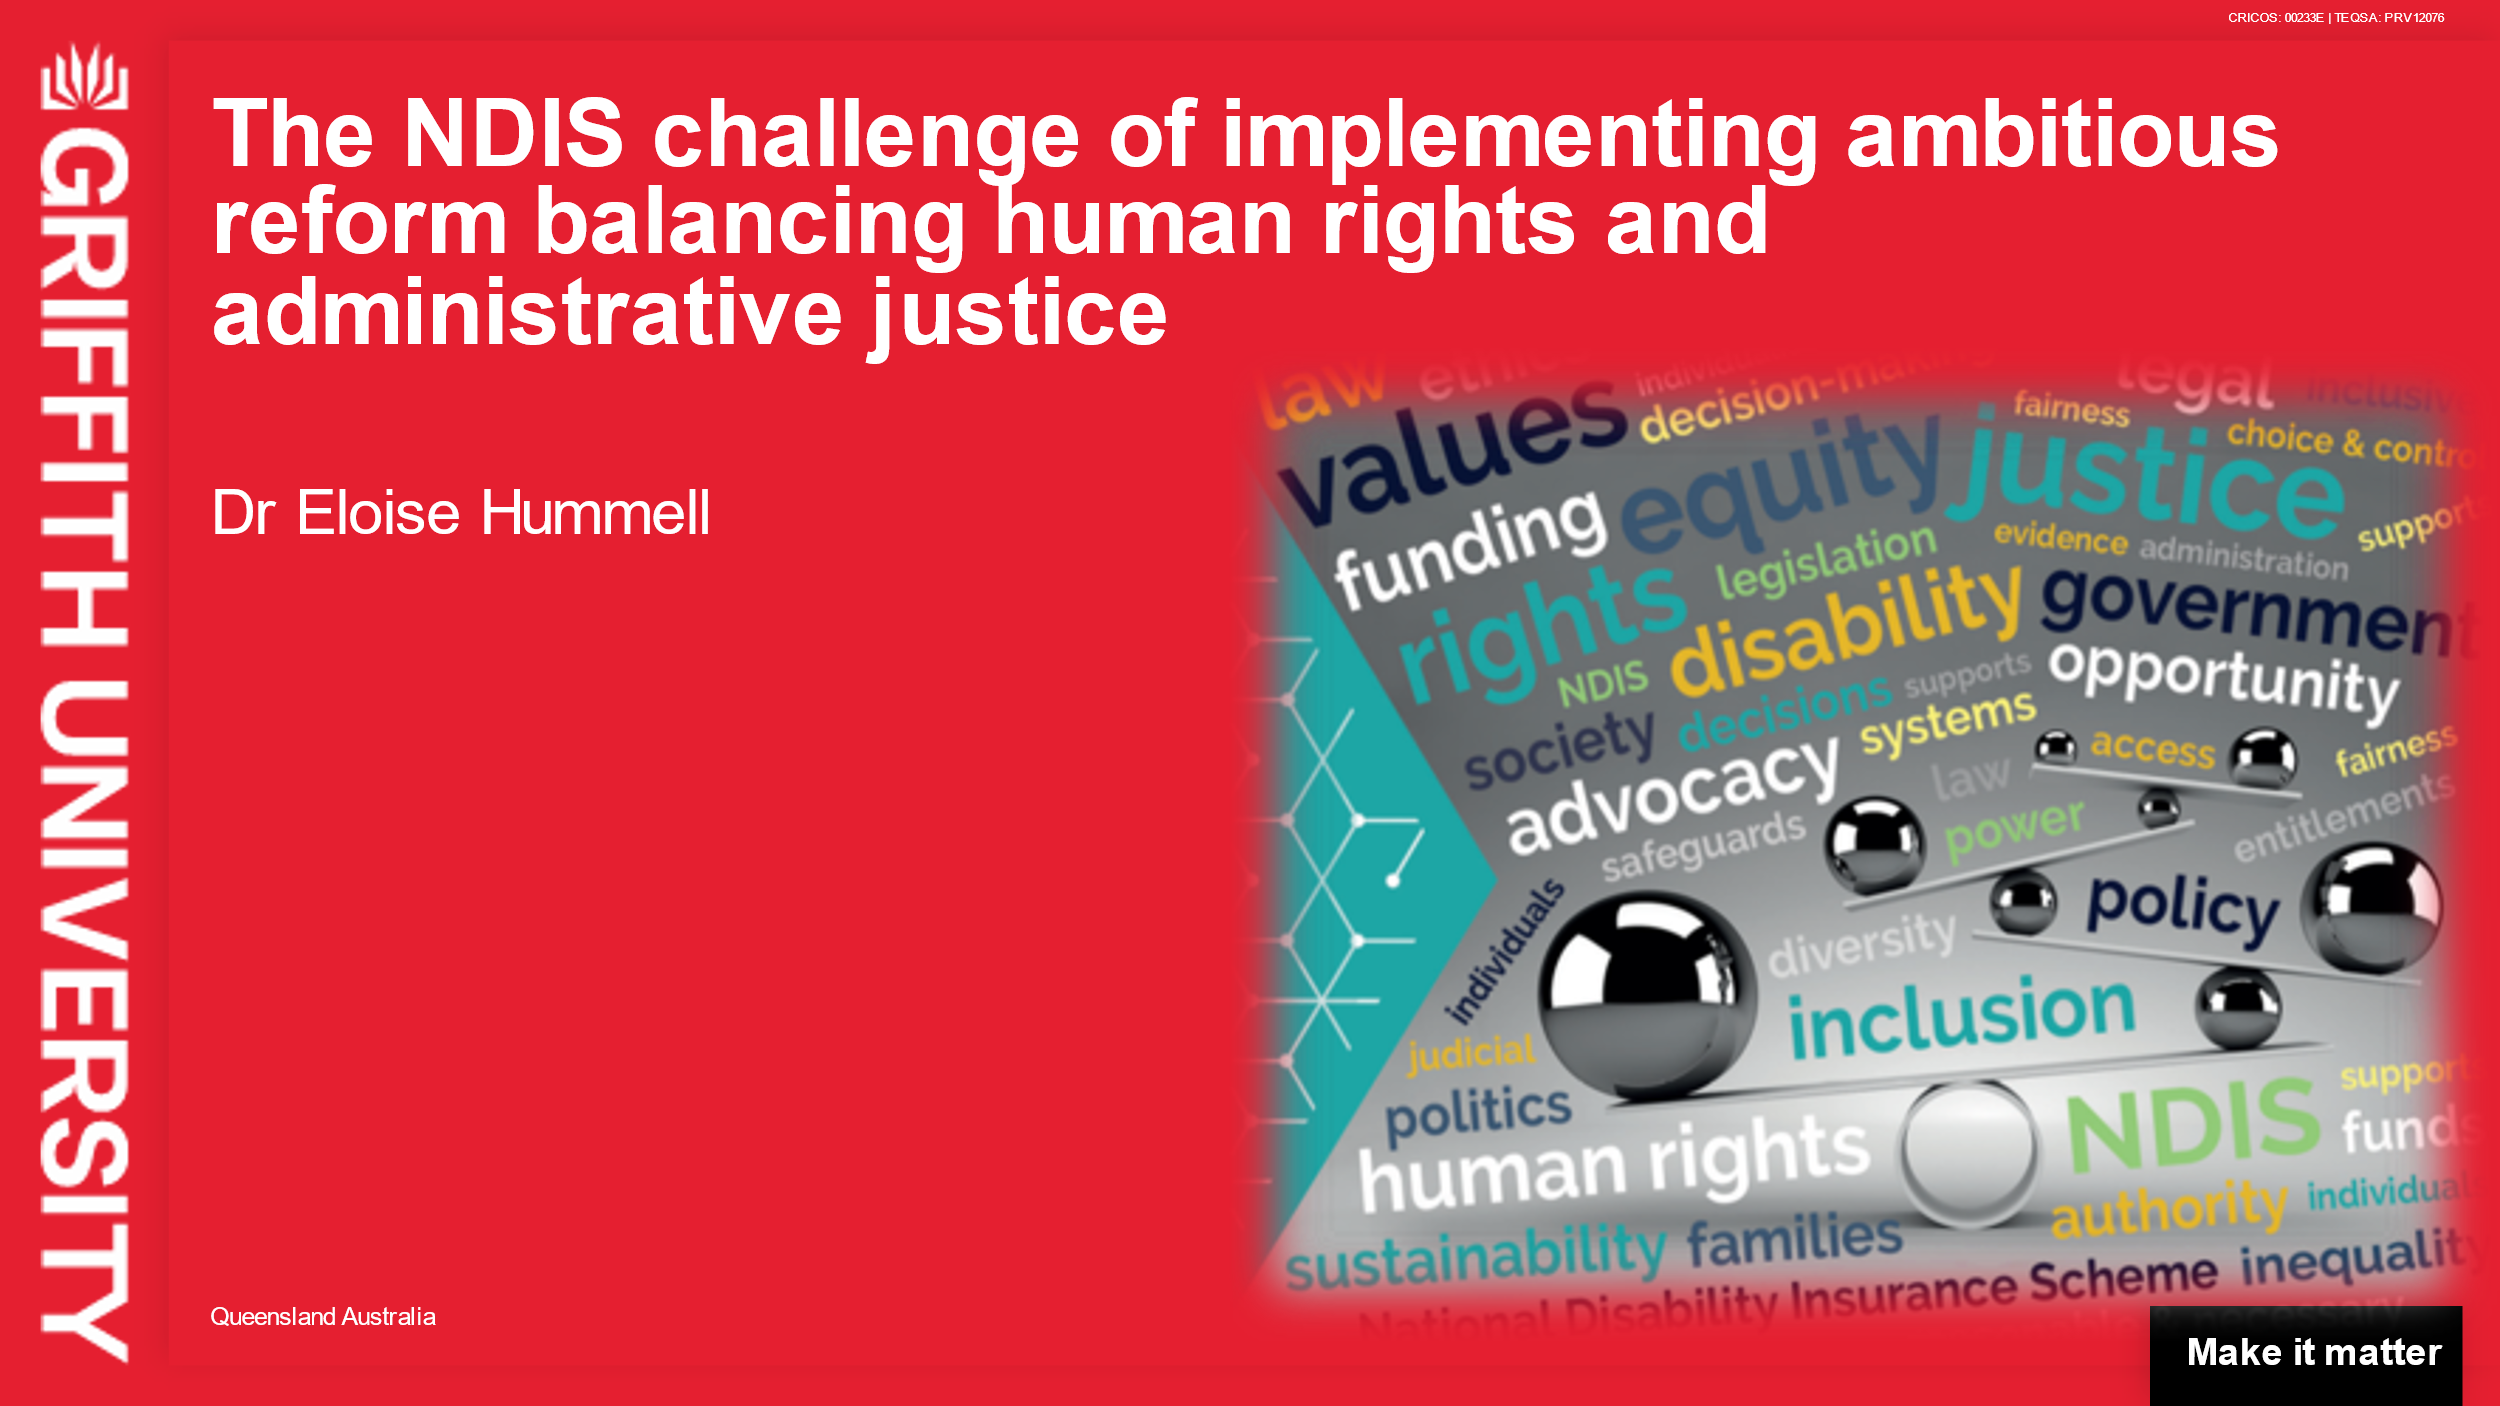 A slide with bright red background and the Griffith University logo on the left hand side. The title of the presentation “The NDIS challenge of implementing ambitious reform balancing human rights and administrative justice” is written in white, bolded letters across the top of the slide. Dr Eloise Hummel is underneath the title, with a busy image of silver planks balancing on shiny black spheres to the right. In between the spheres and planks in the image is a word cloud with words representing the project.